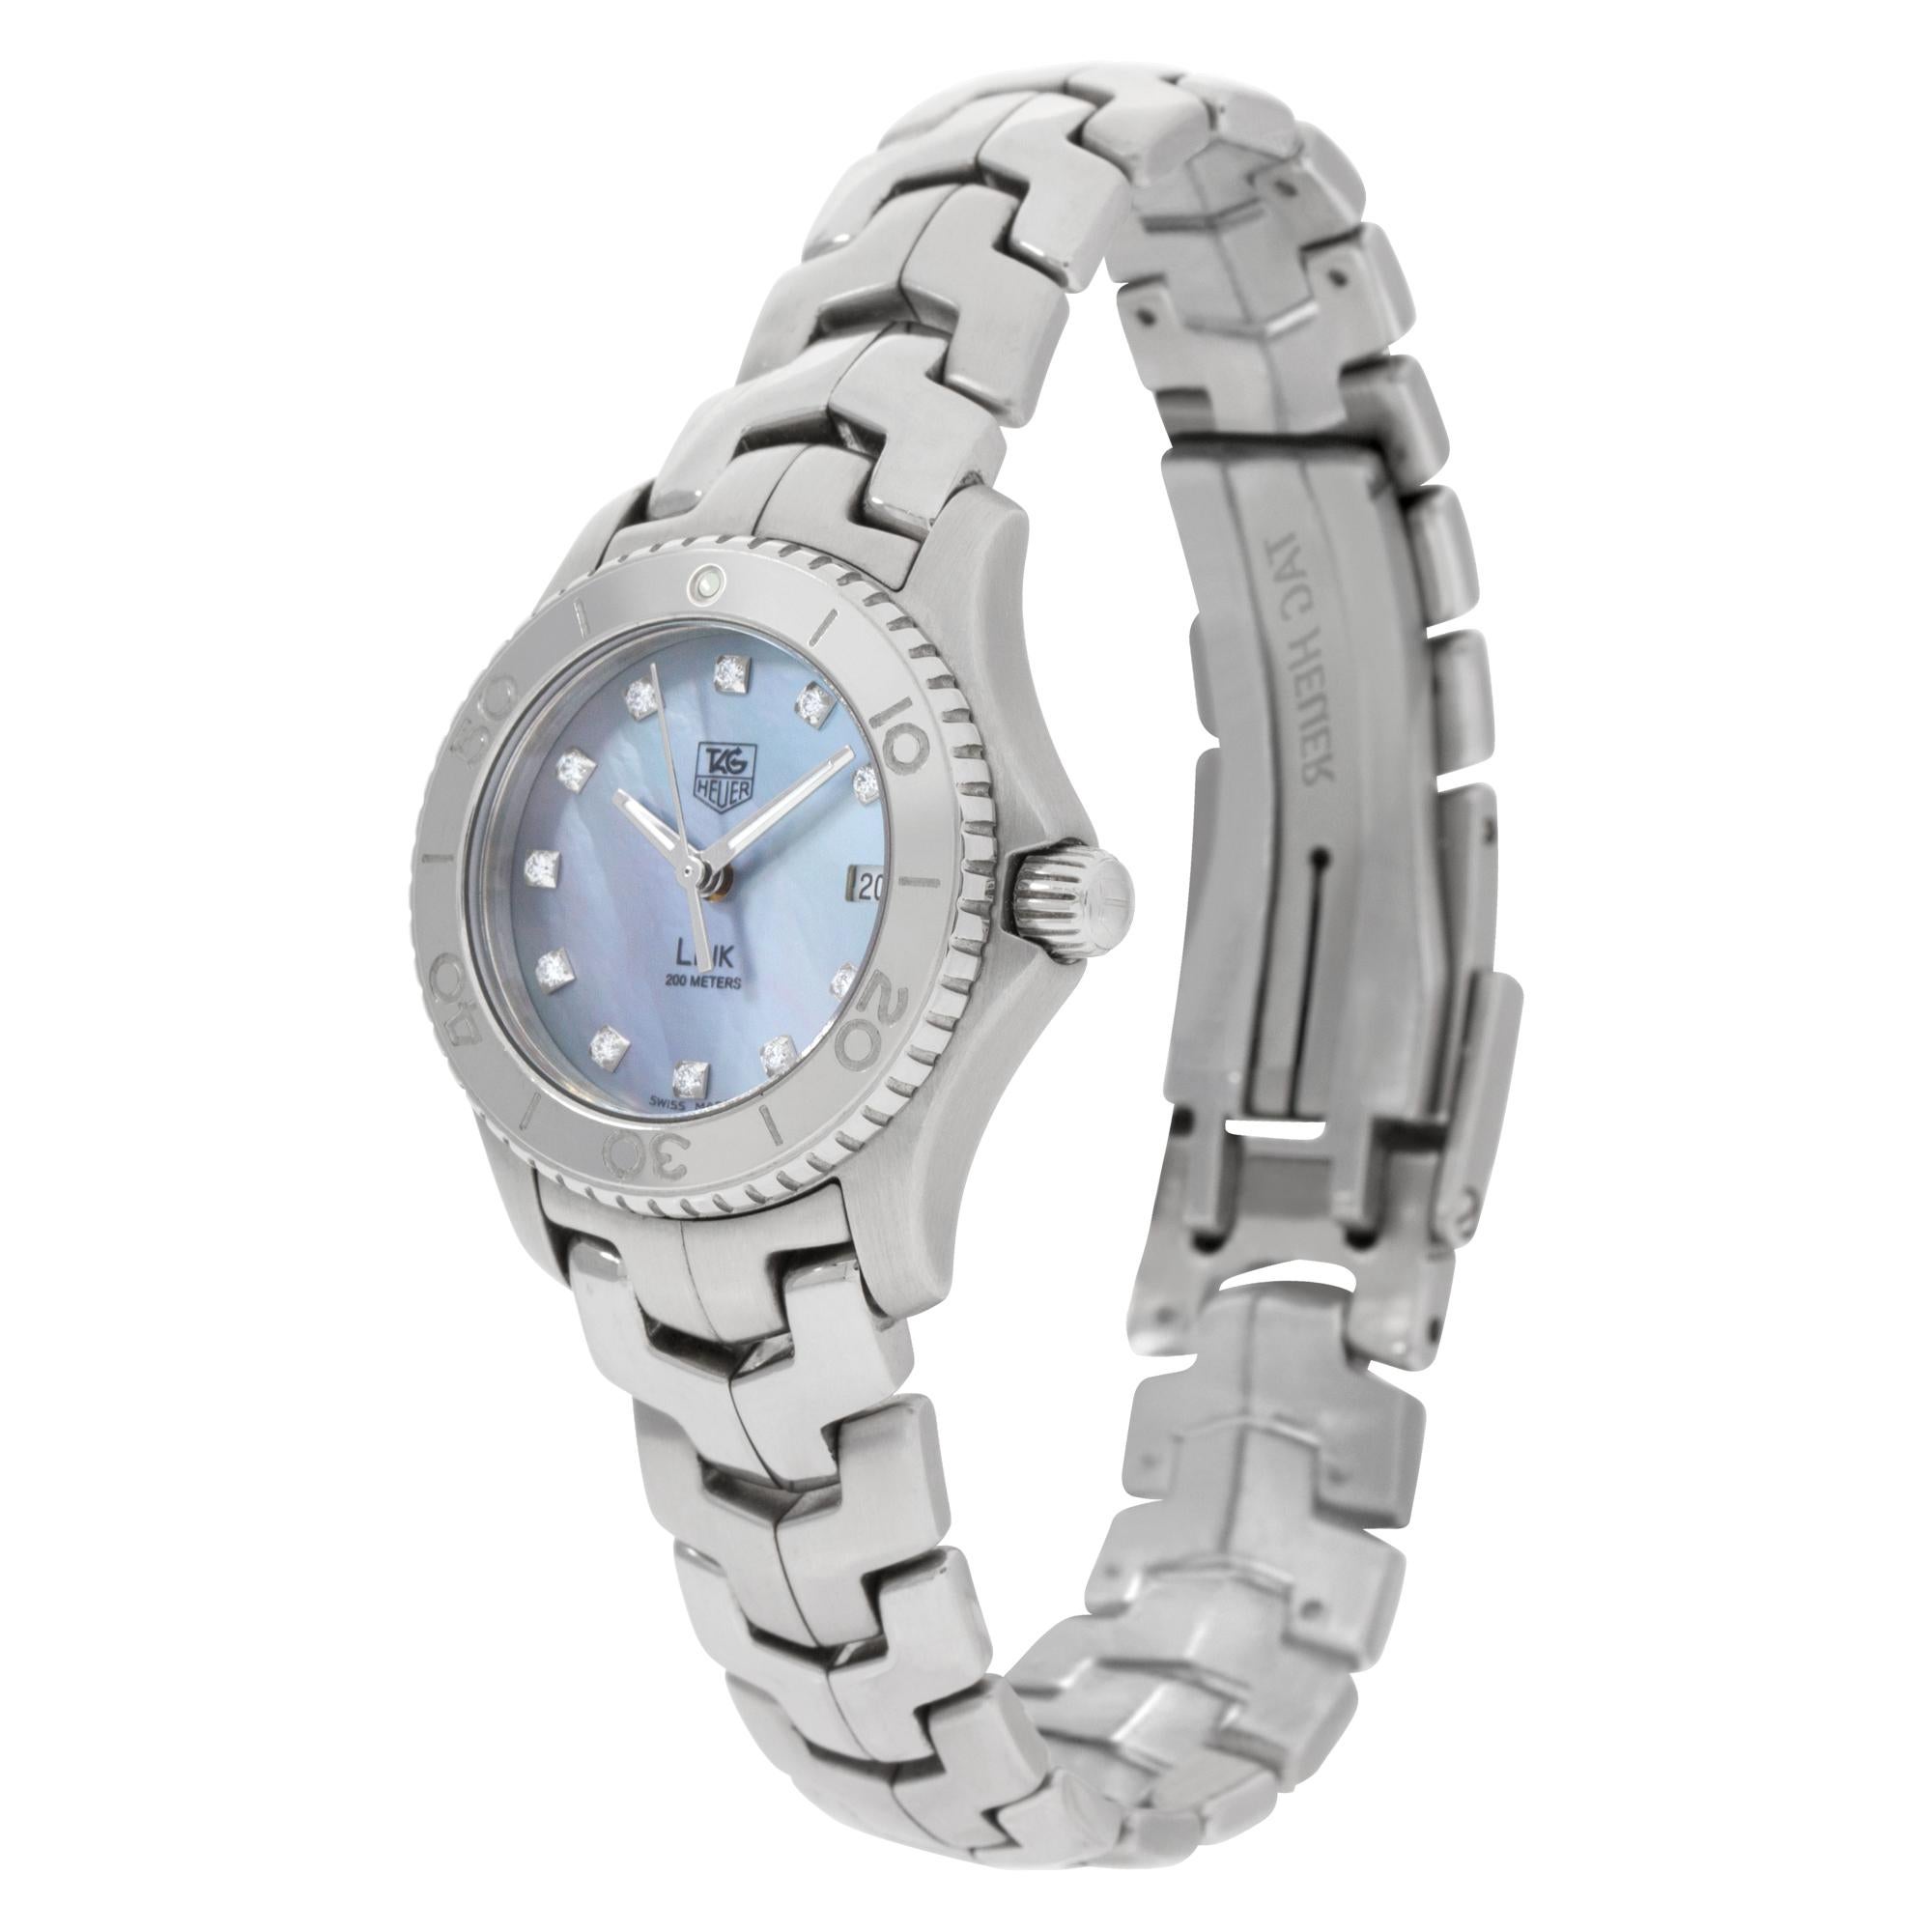 Tag Heuer Link with blue Mother of Pearl diamond dial in stainless steel. Quartz with sweep seconds and date. 26.5 mm case size. Ref WJ1317-0. Fine Pre-owned Tag Heuer Watch.

Certified preowned Sport Tag Heuer Link WJ1317-0 watch is made out of